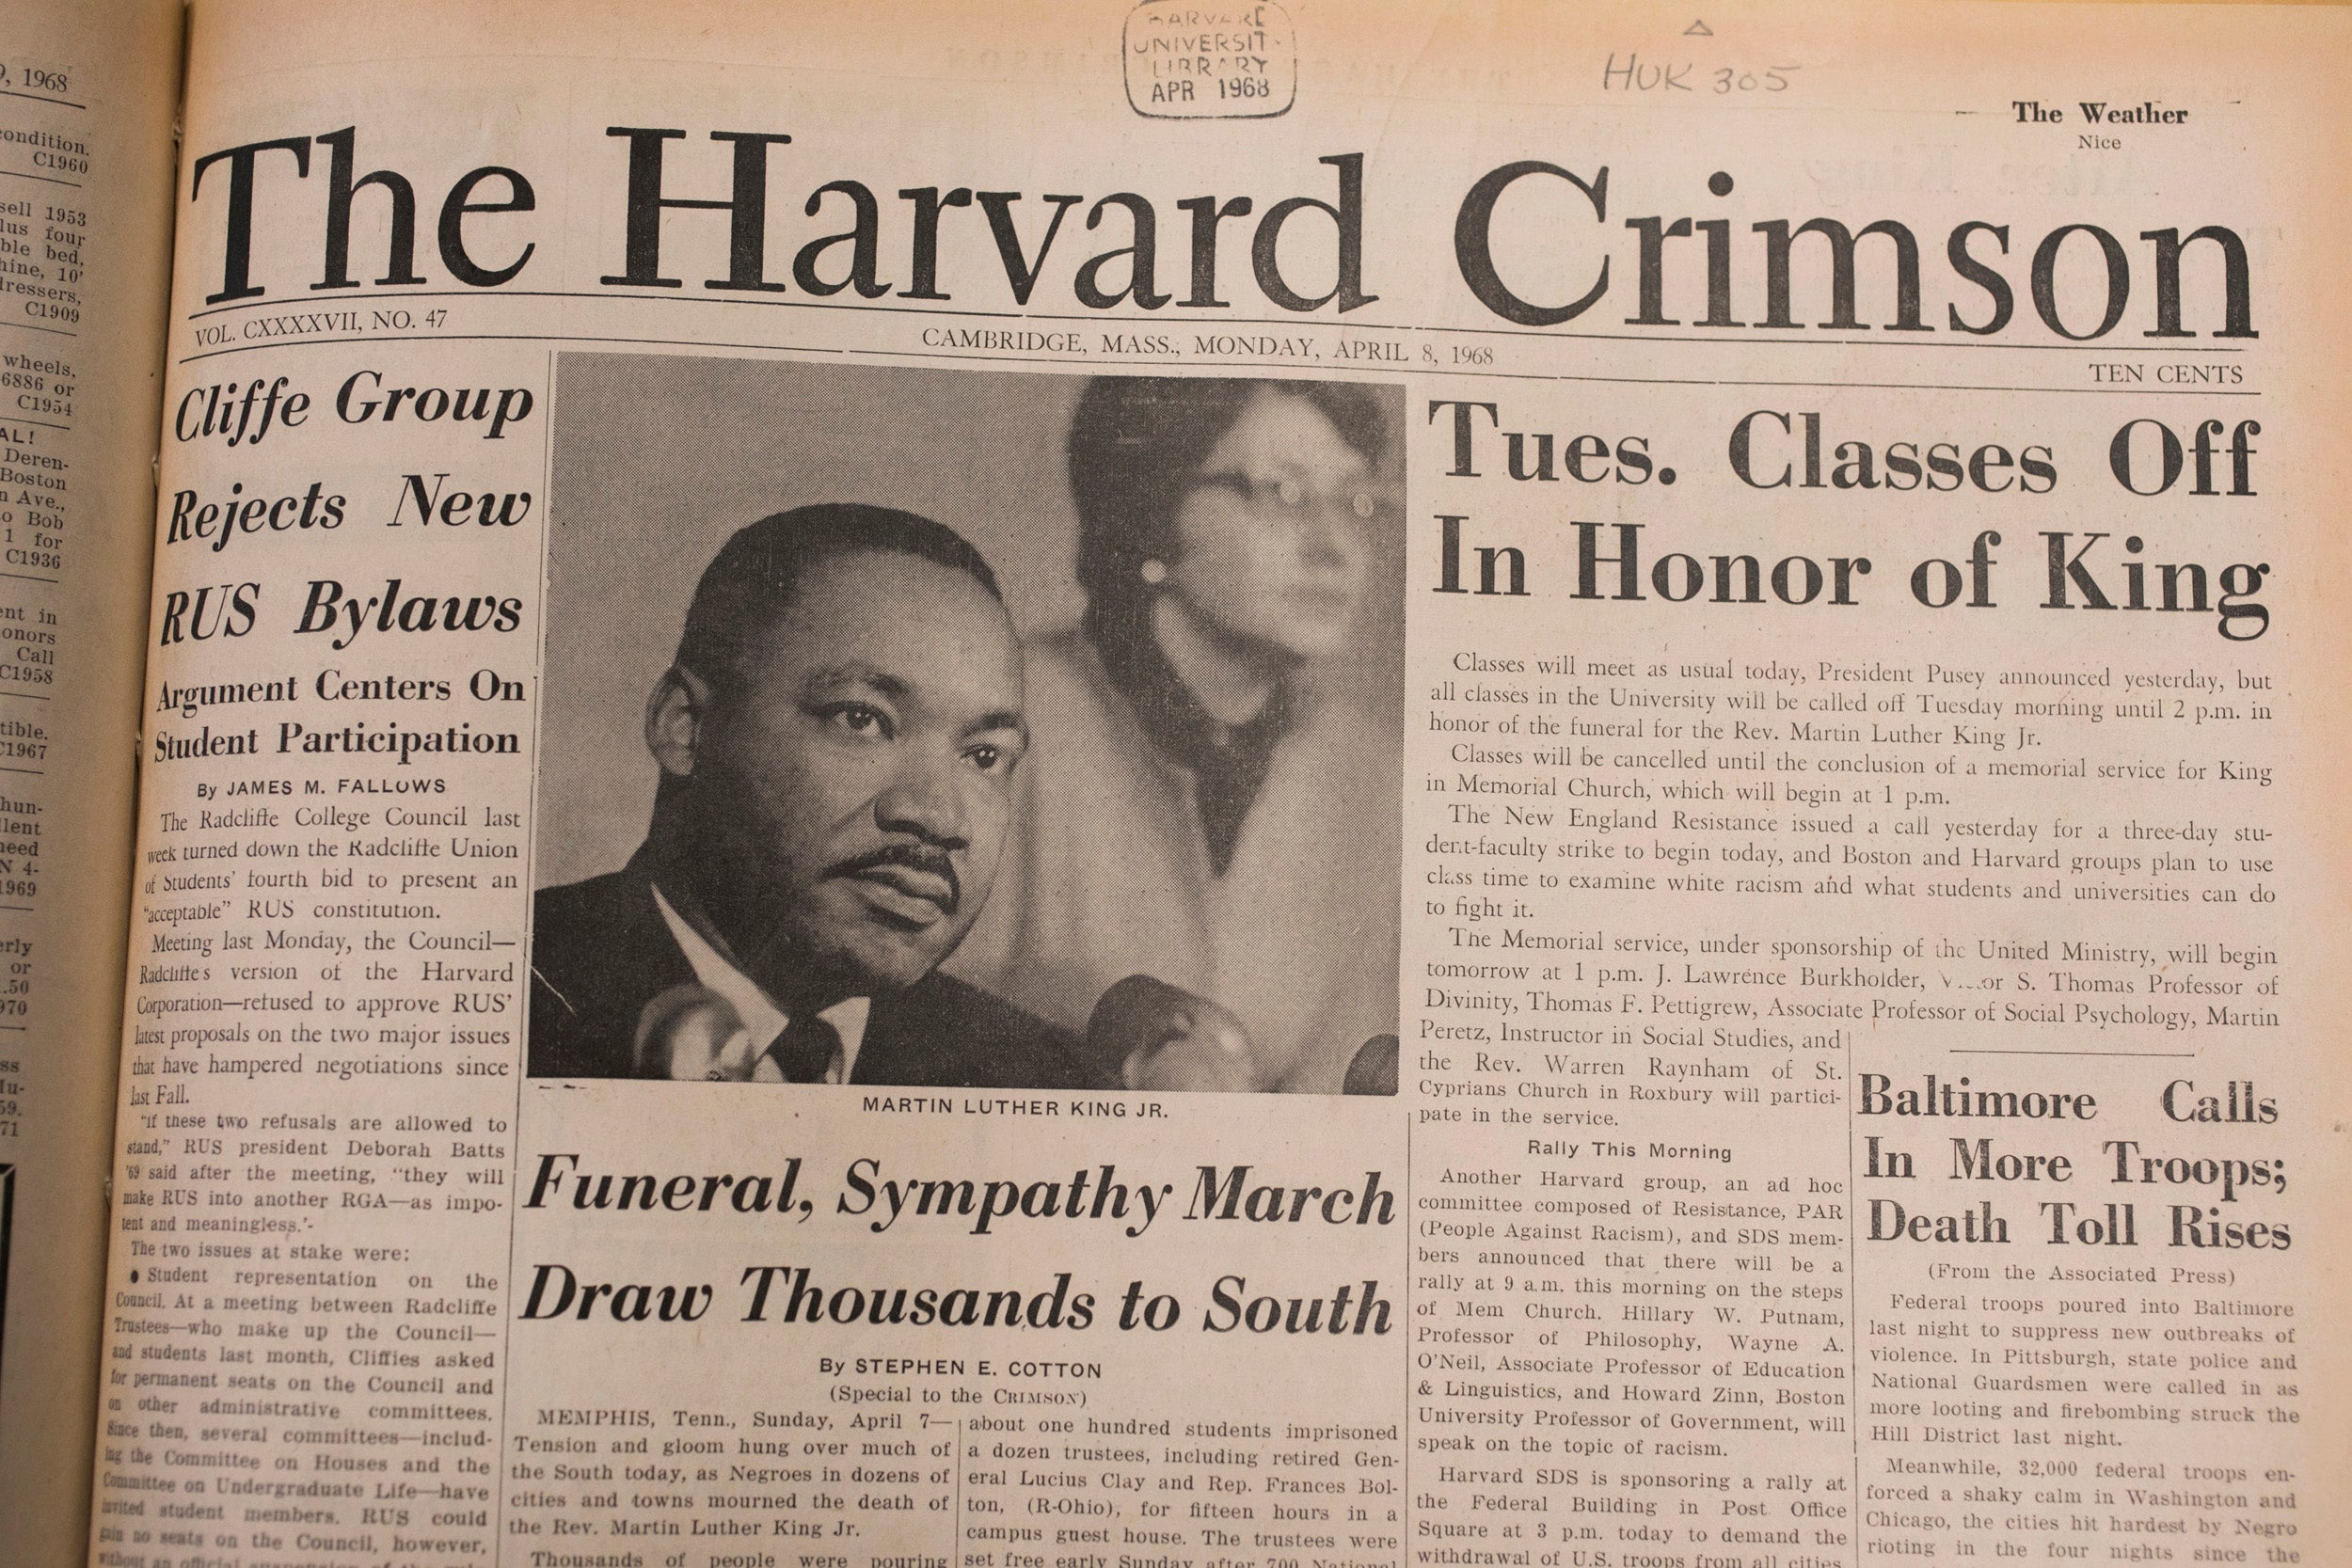 The Harvard Crimson’s April 8, 1968, front page.